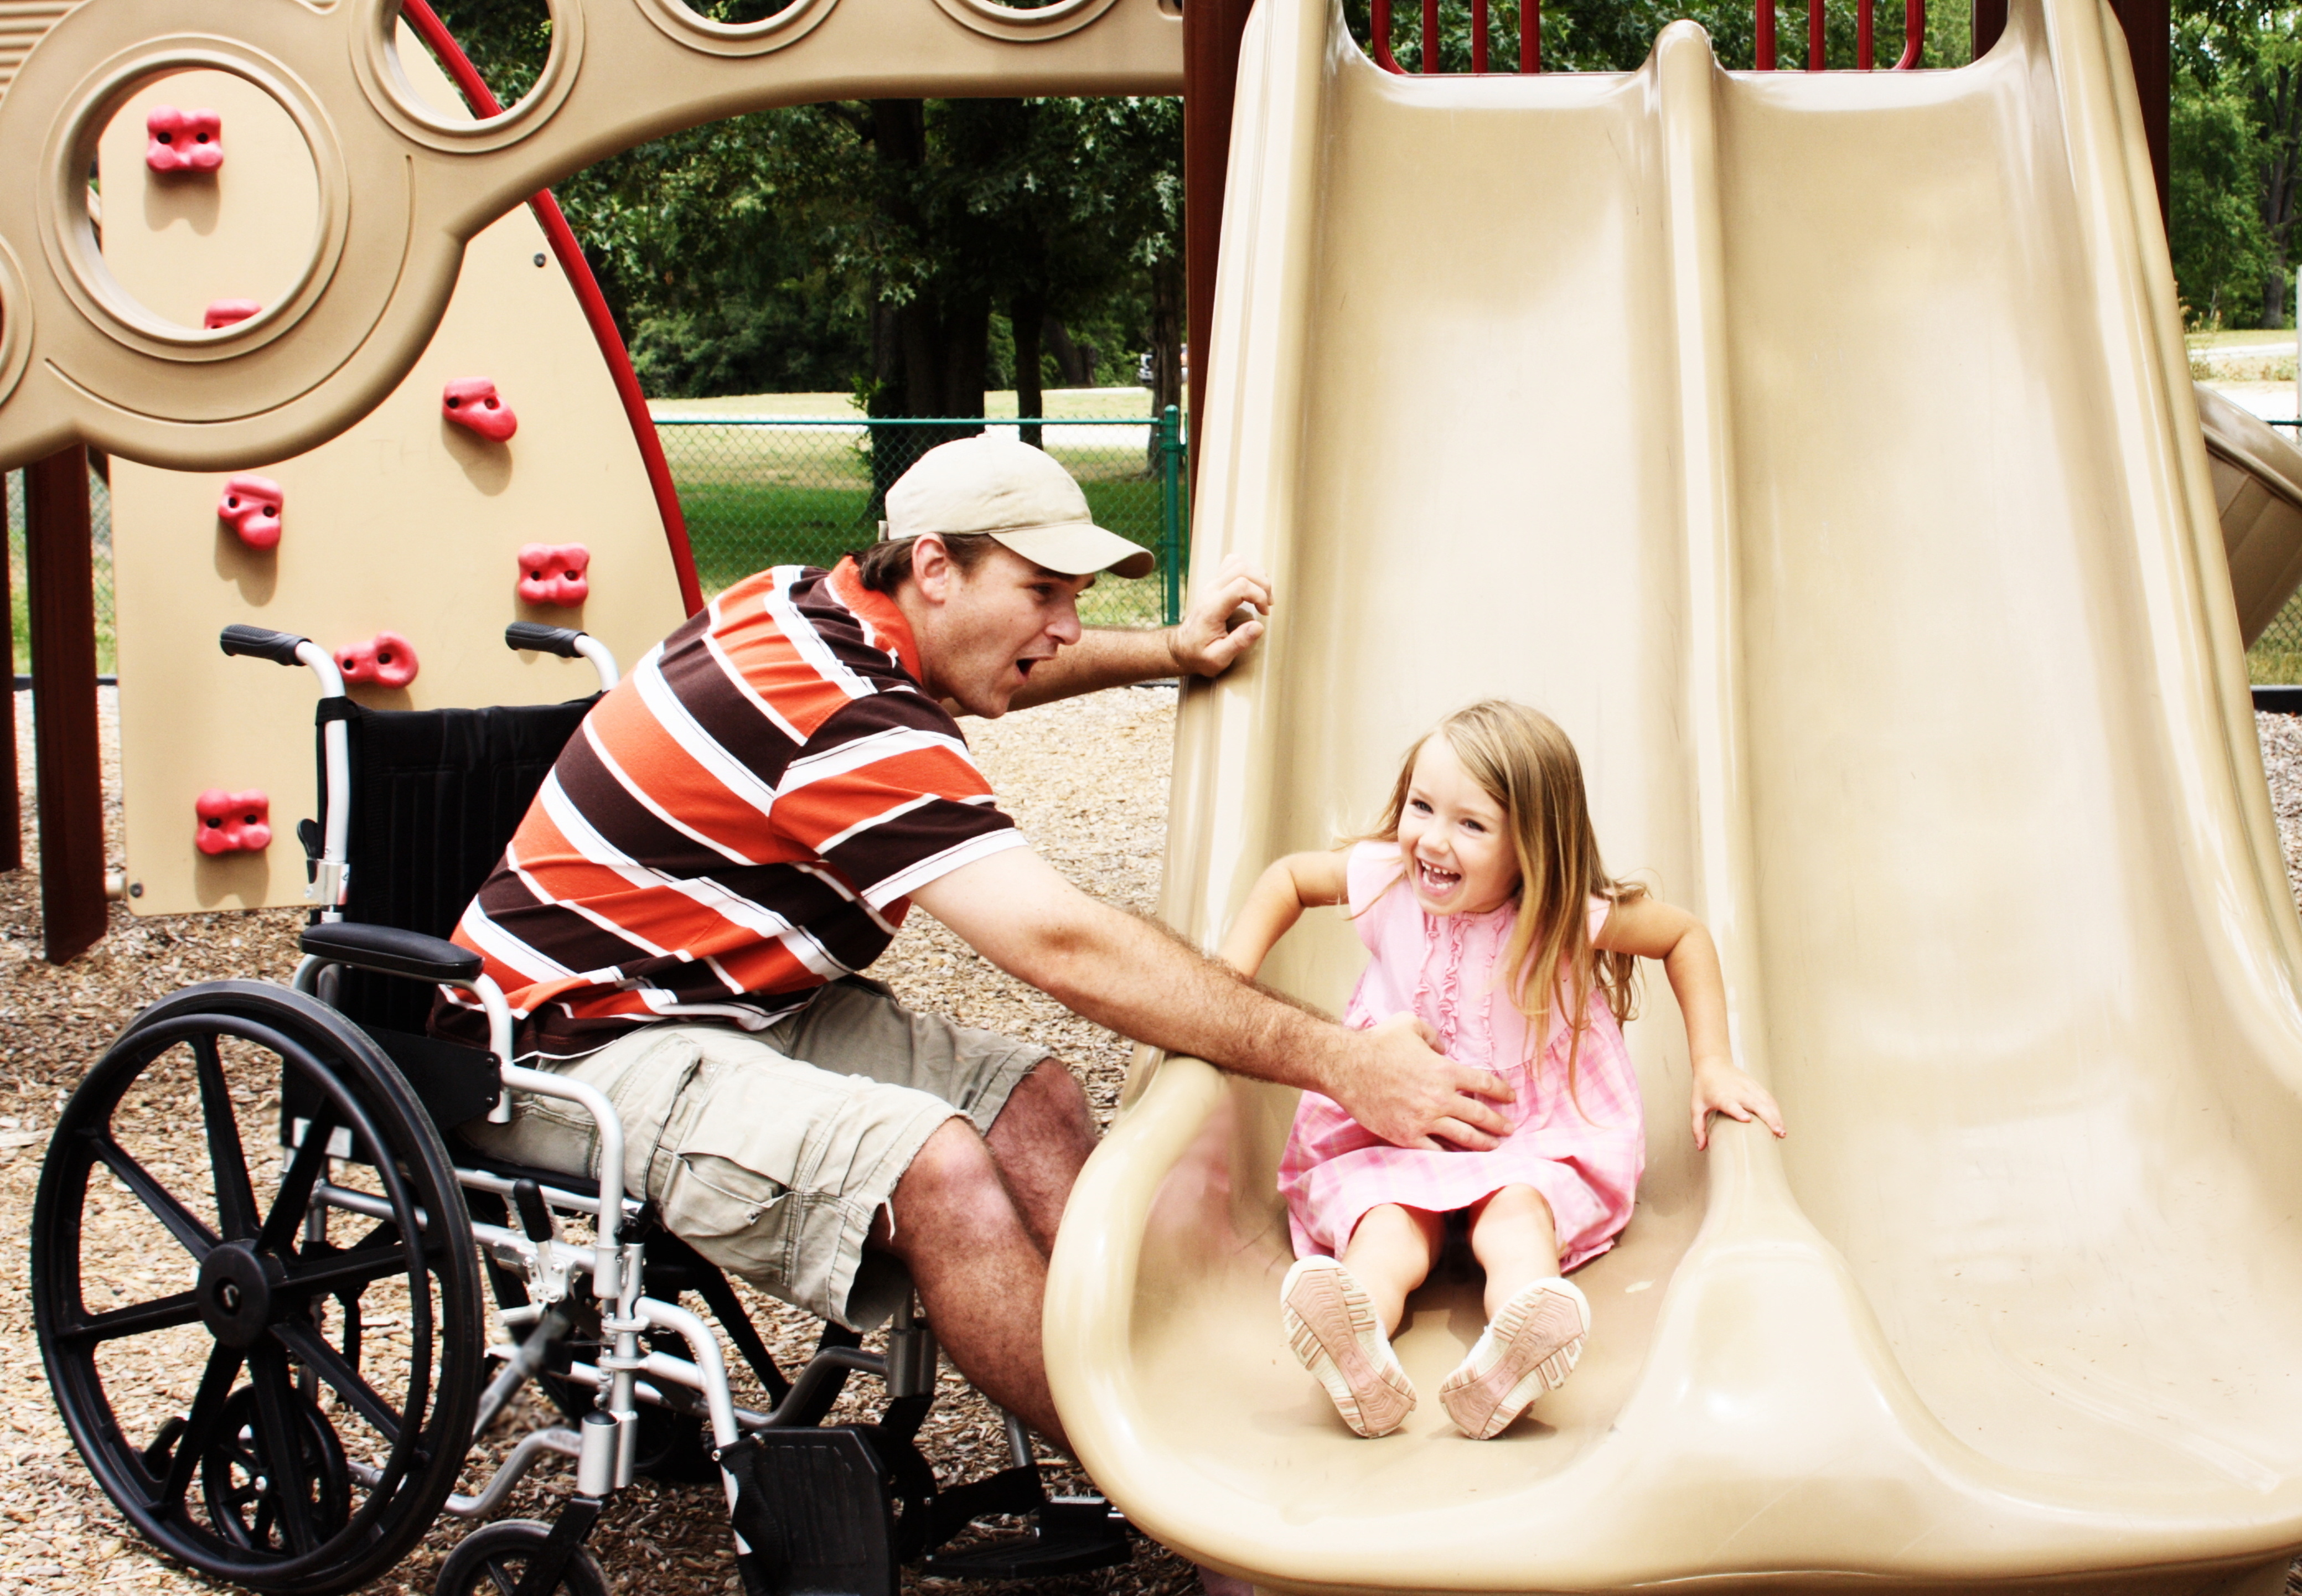 "A man sitting in a wheelchair leans toward a slide at a playground to help catch a young girl smiling as she slides down"